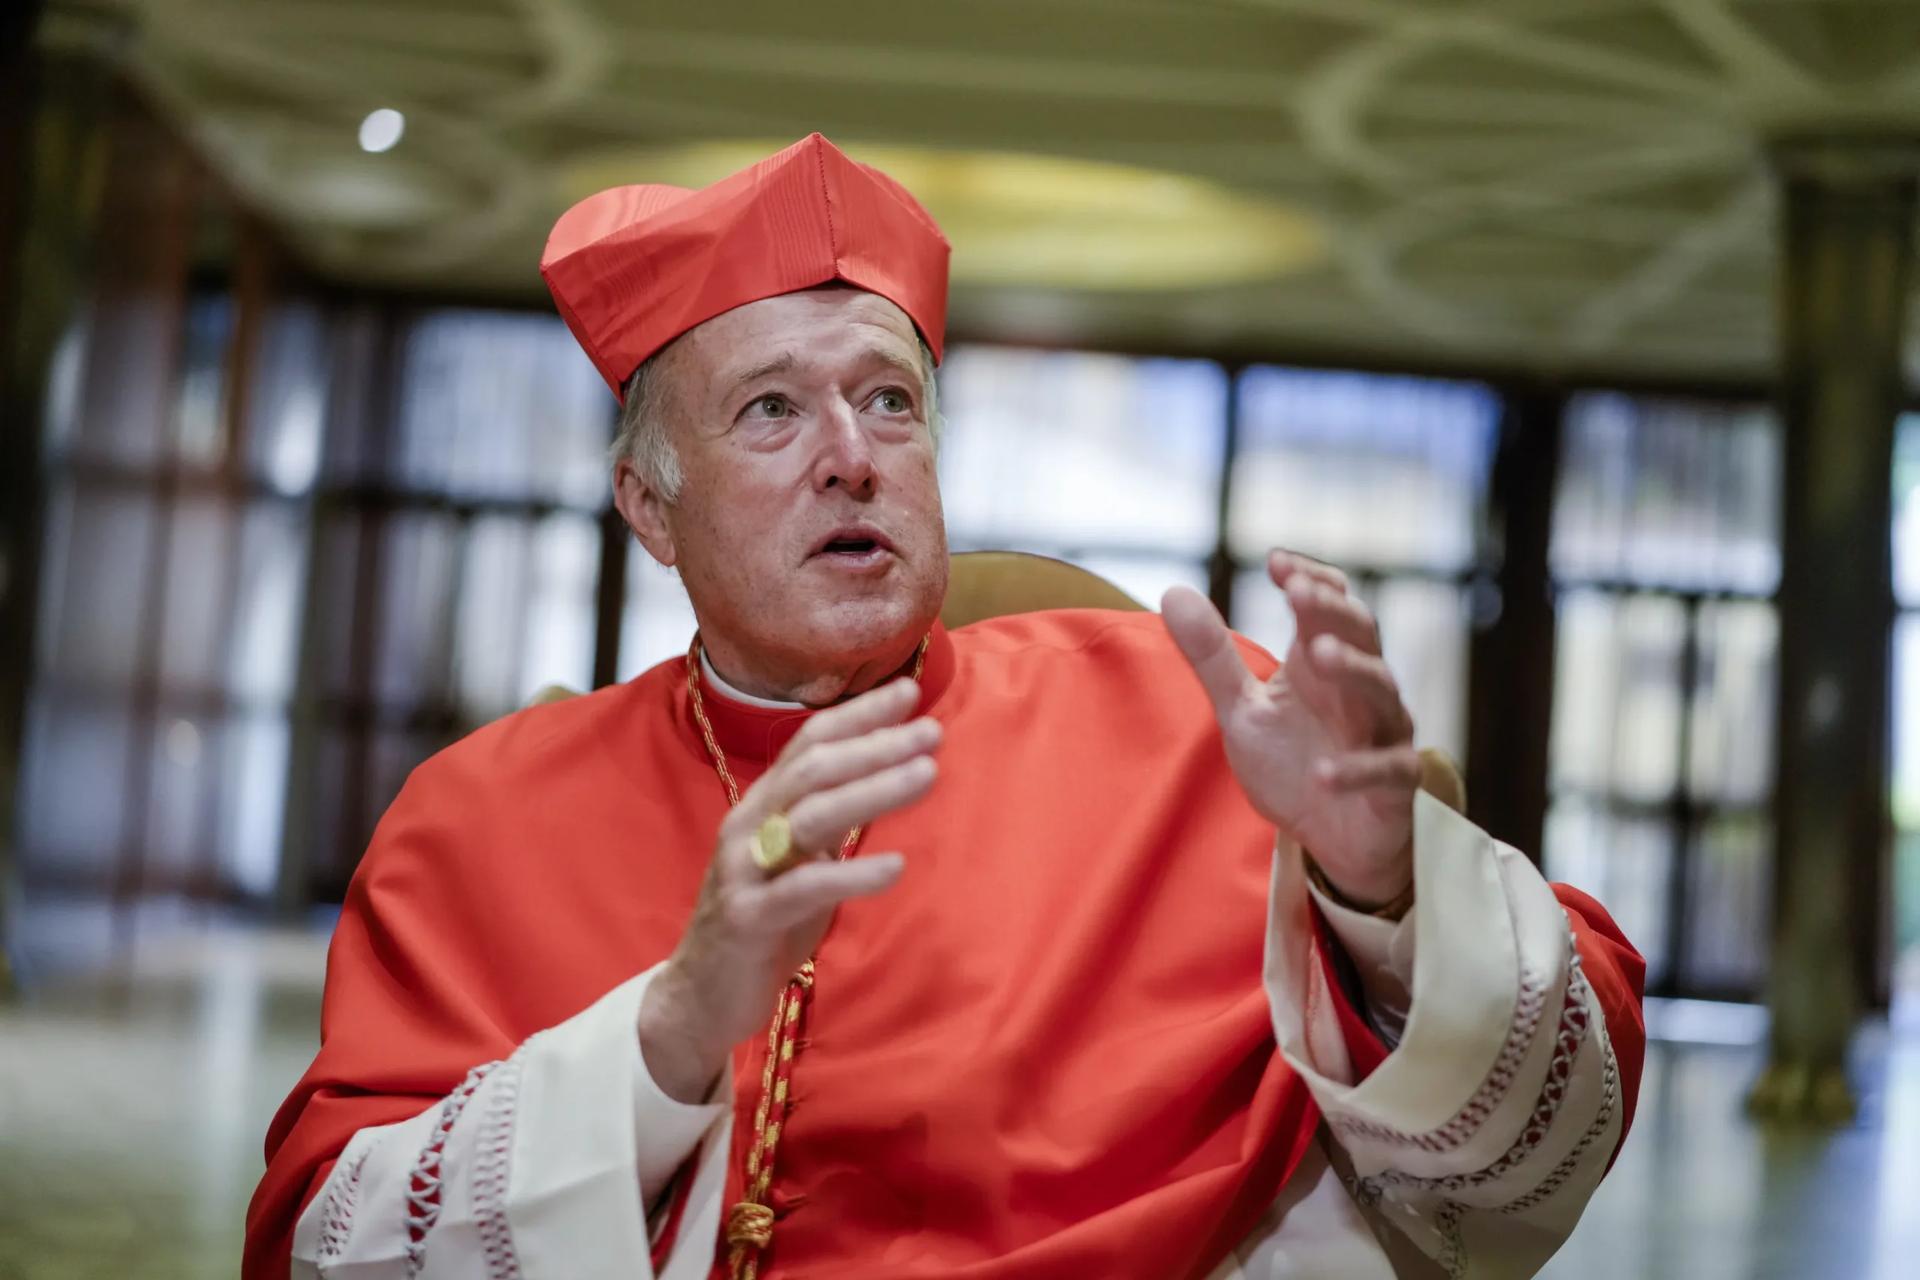 Key Pope ally says US blowback on Fiducia is fueled by anti-gay ‘animus’